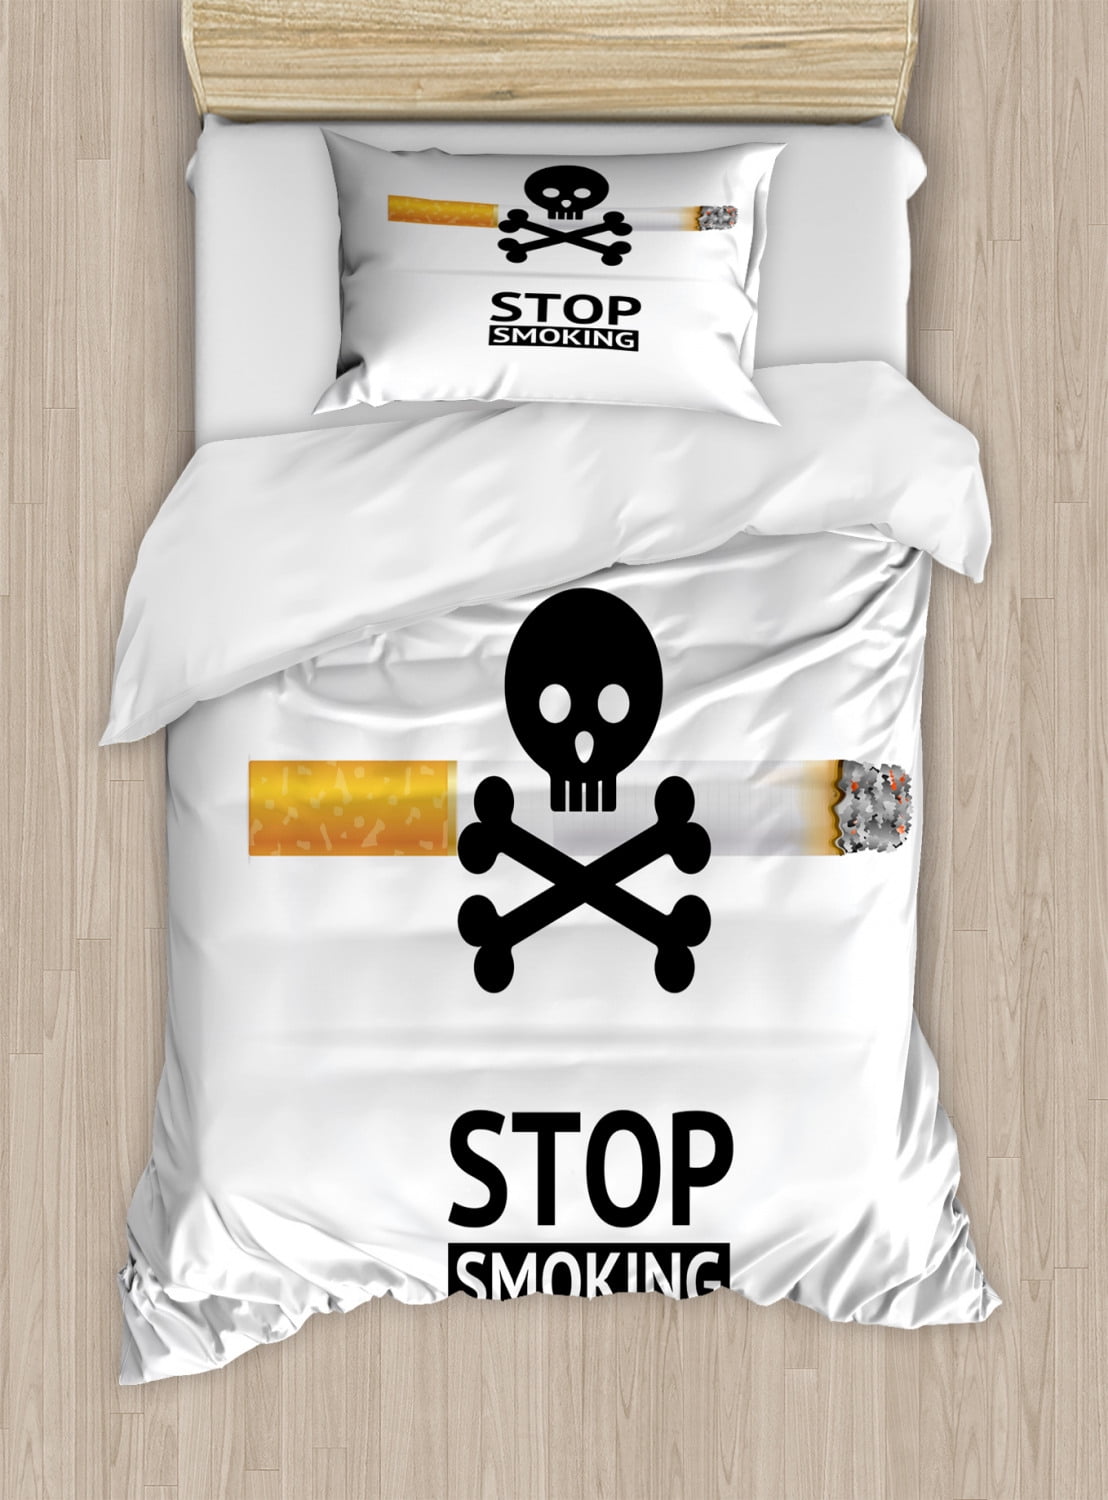 matematiker medaljevinder violinist Skull Smoking Duvet Cover Set Twin Size, Danger Symbol About Health Issues  and Cigarette on Background, Decorative 2 Piece Bedding Set with 1 Pillow  Sham, Off White Charcoal Grey, by Ambesonne - Walmart.com